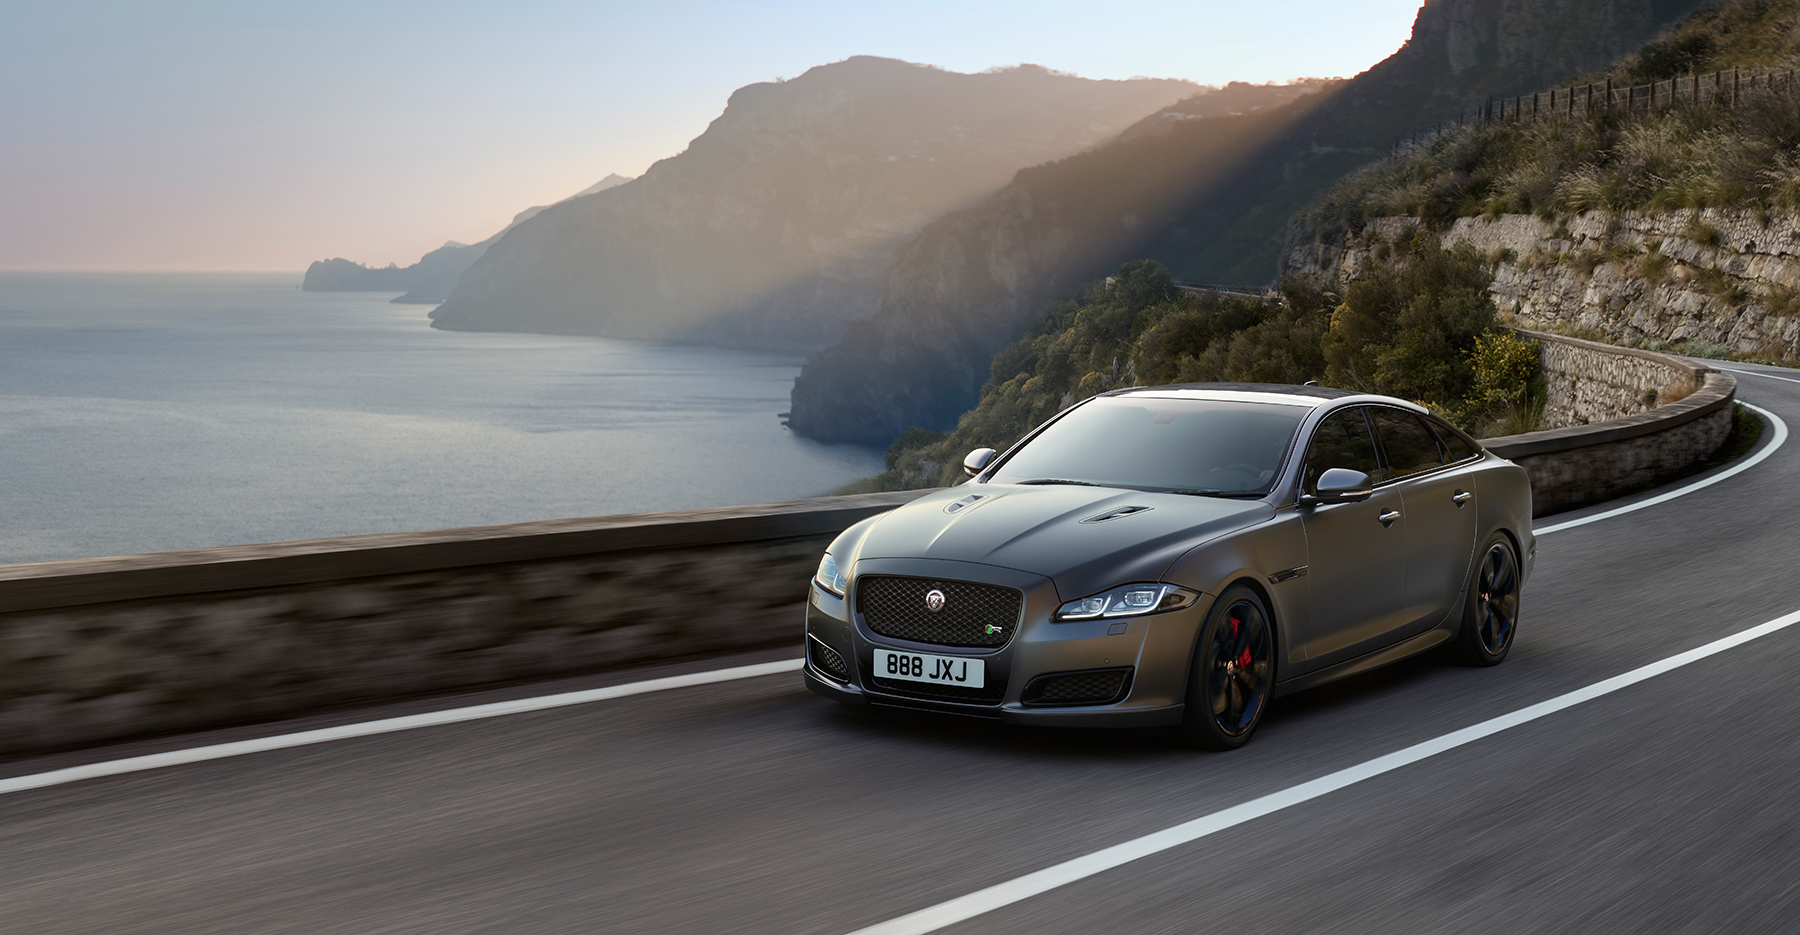 Trigger Shoots Jaguar cars photoshoot in Italy